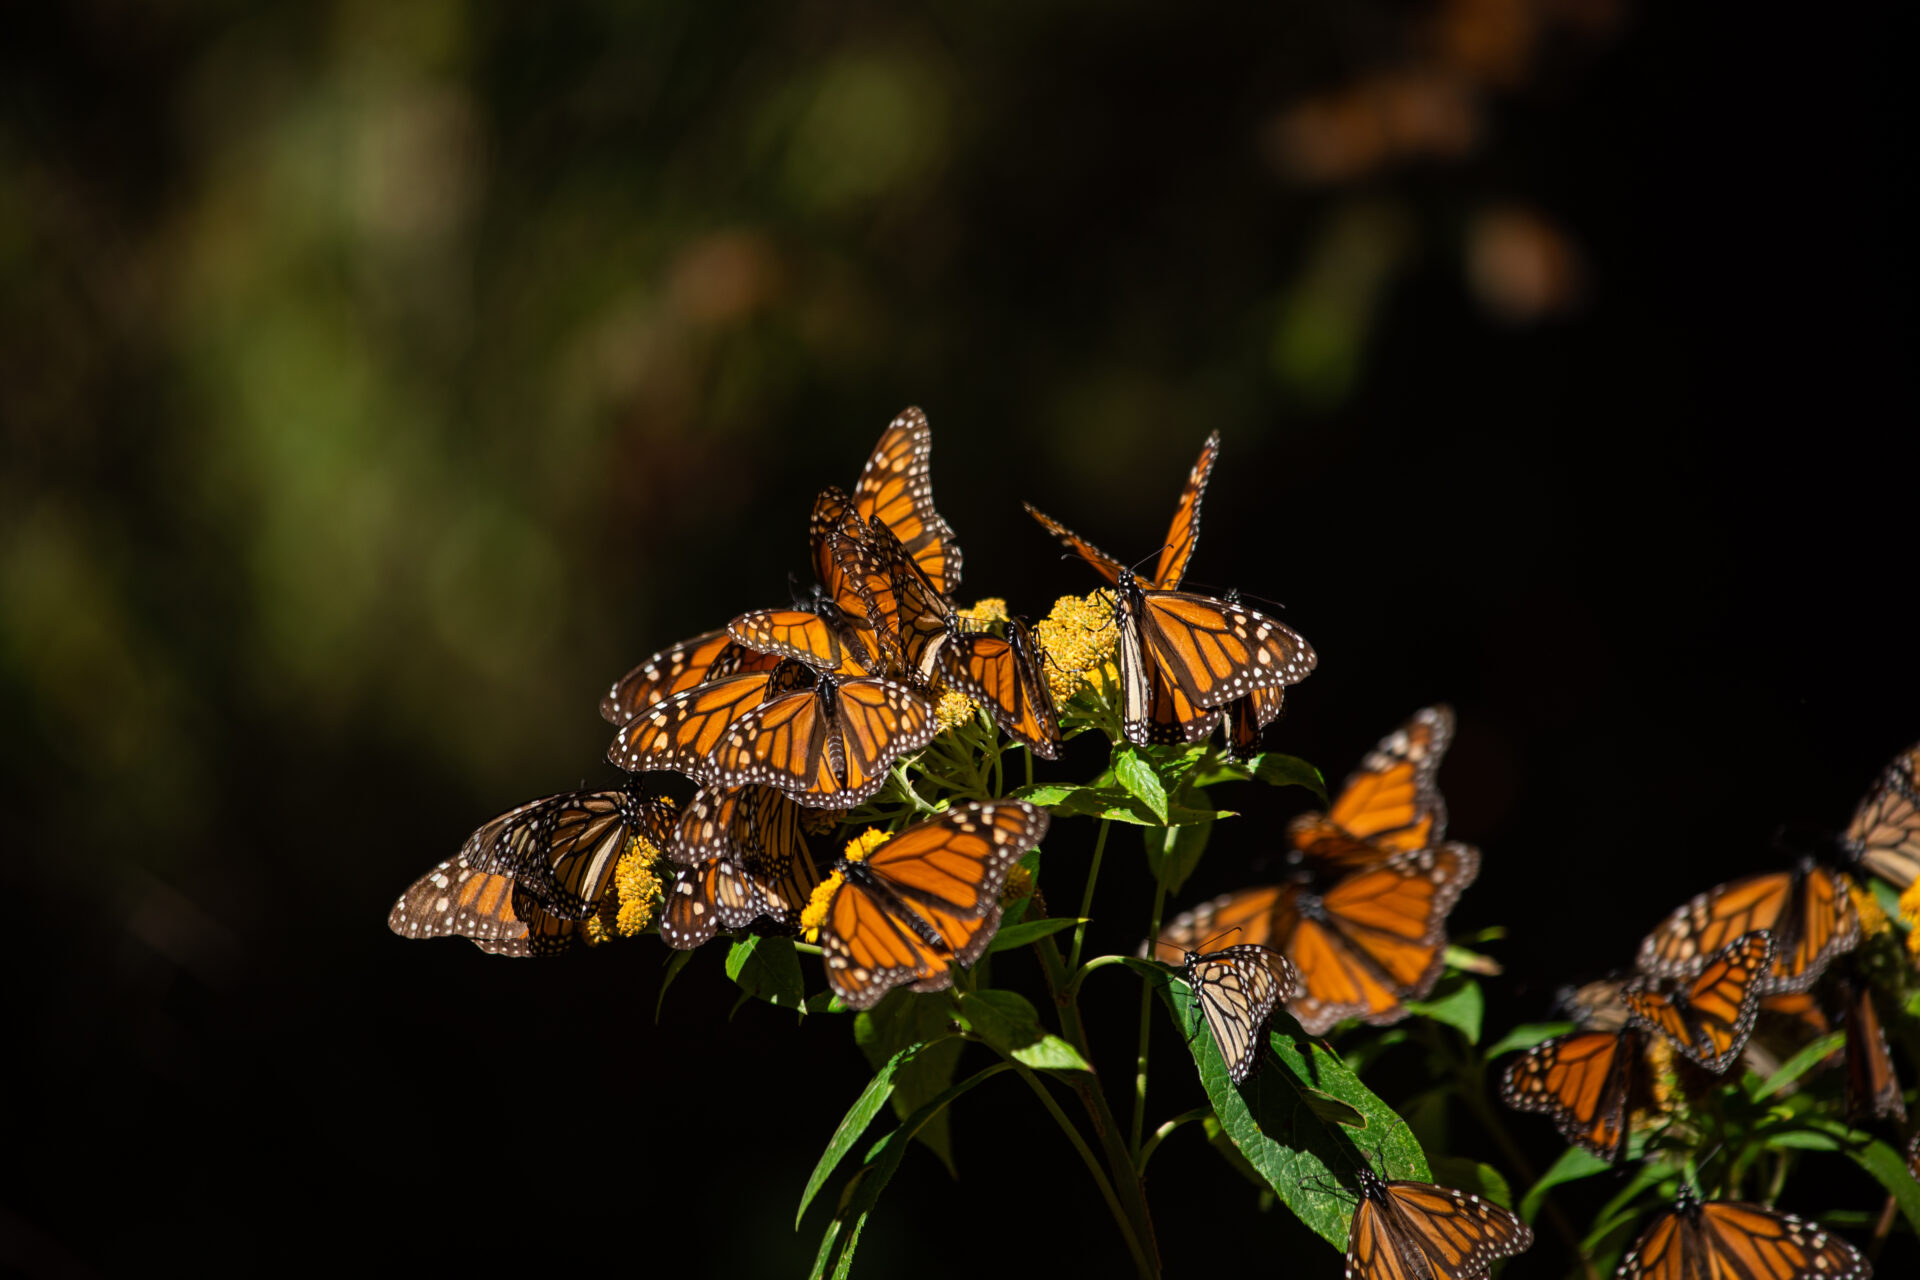 Close up shot of multiple monarch butterflies sitting on a flower.